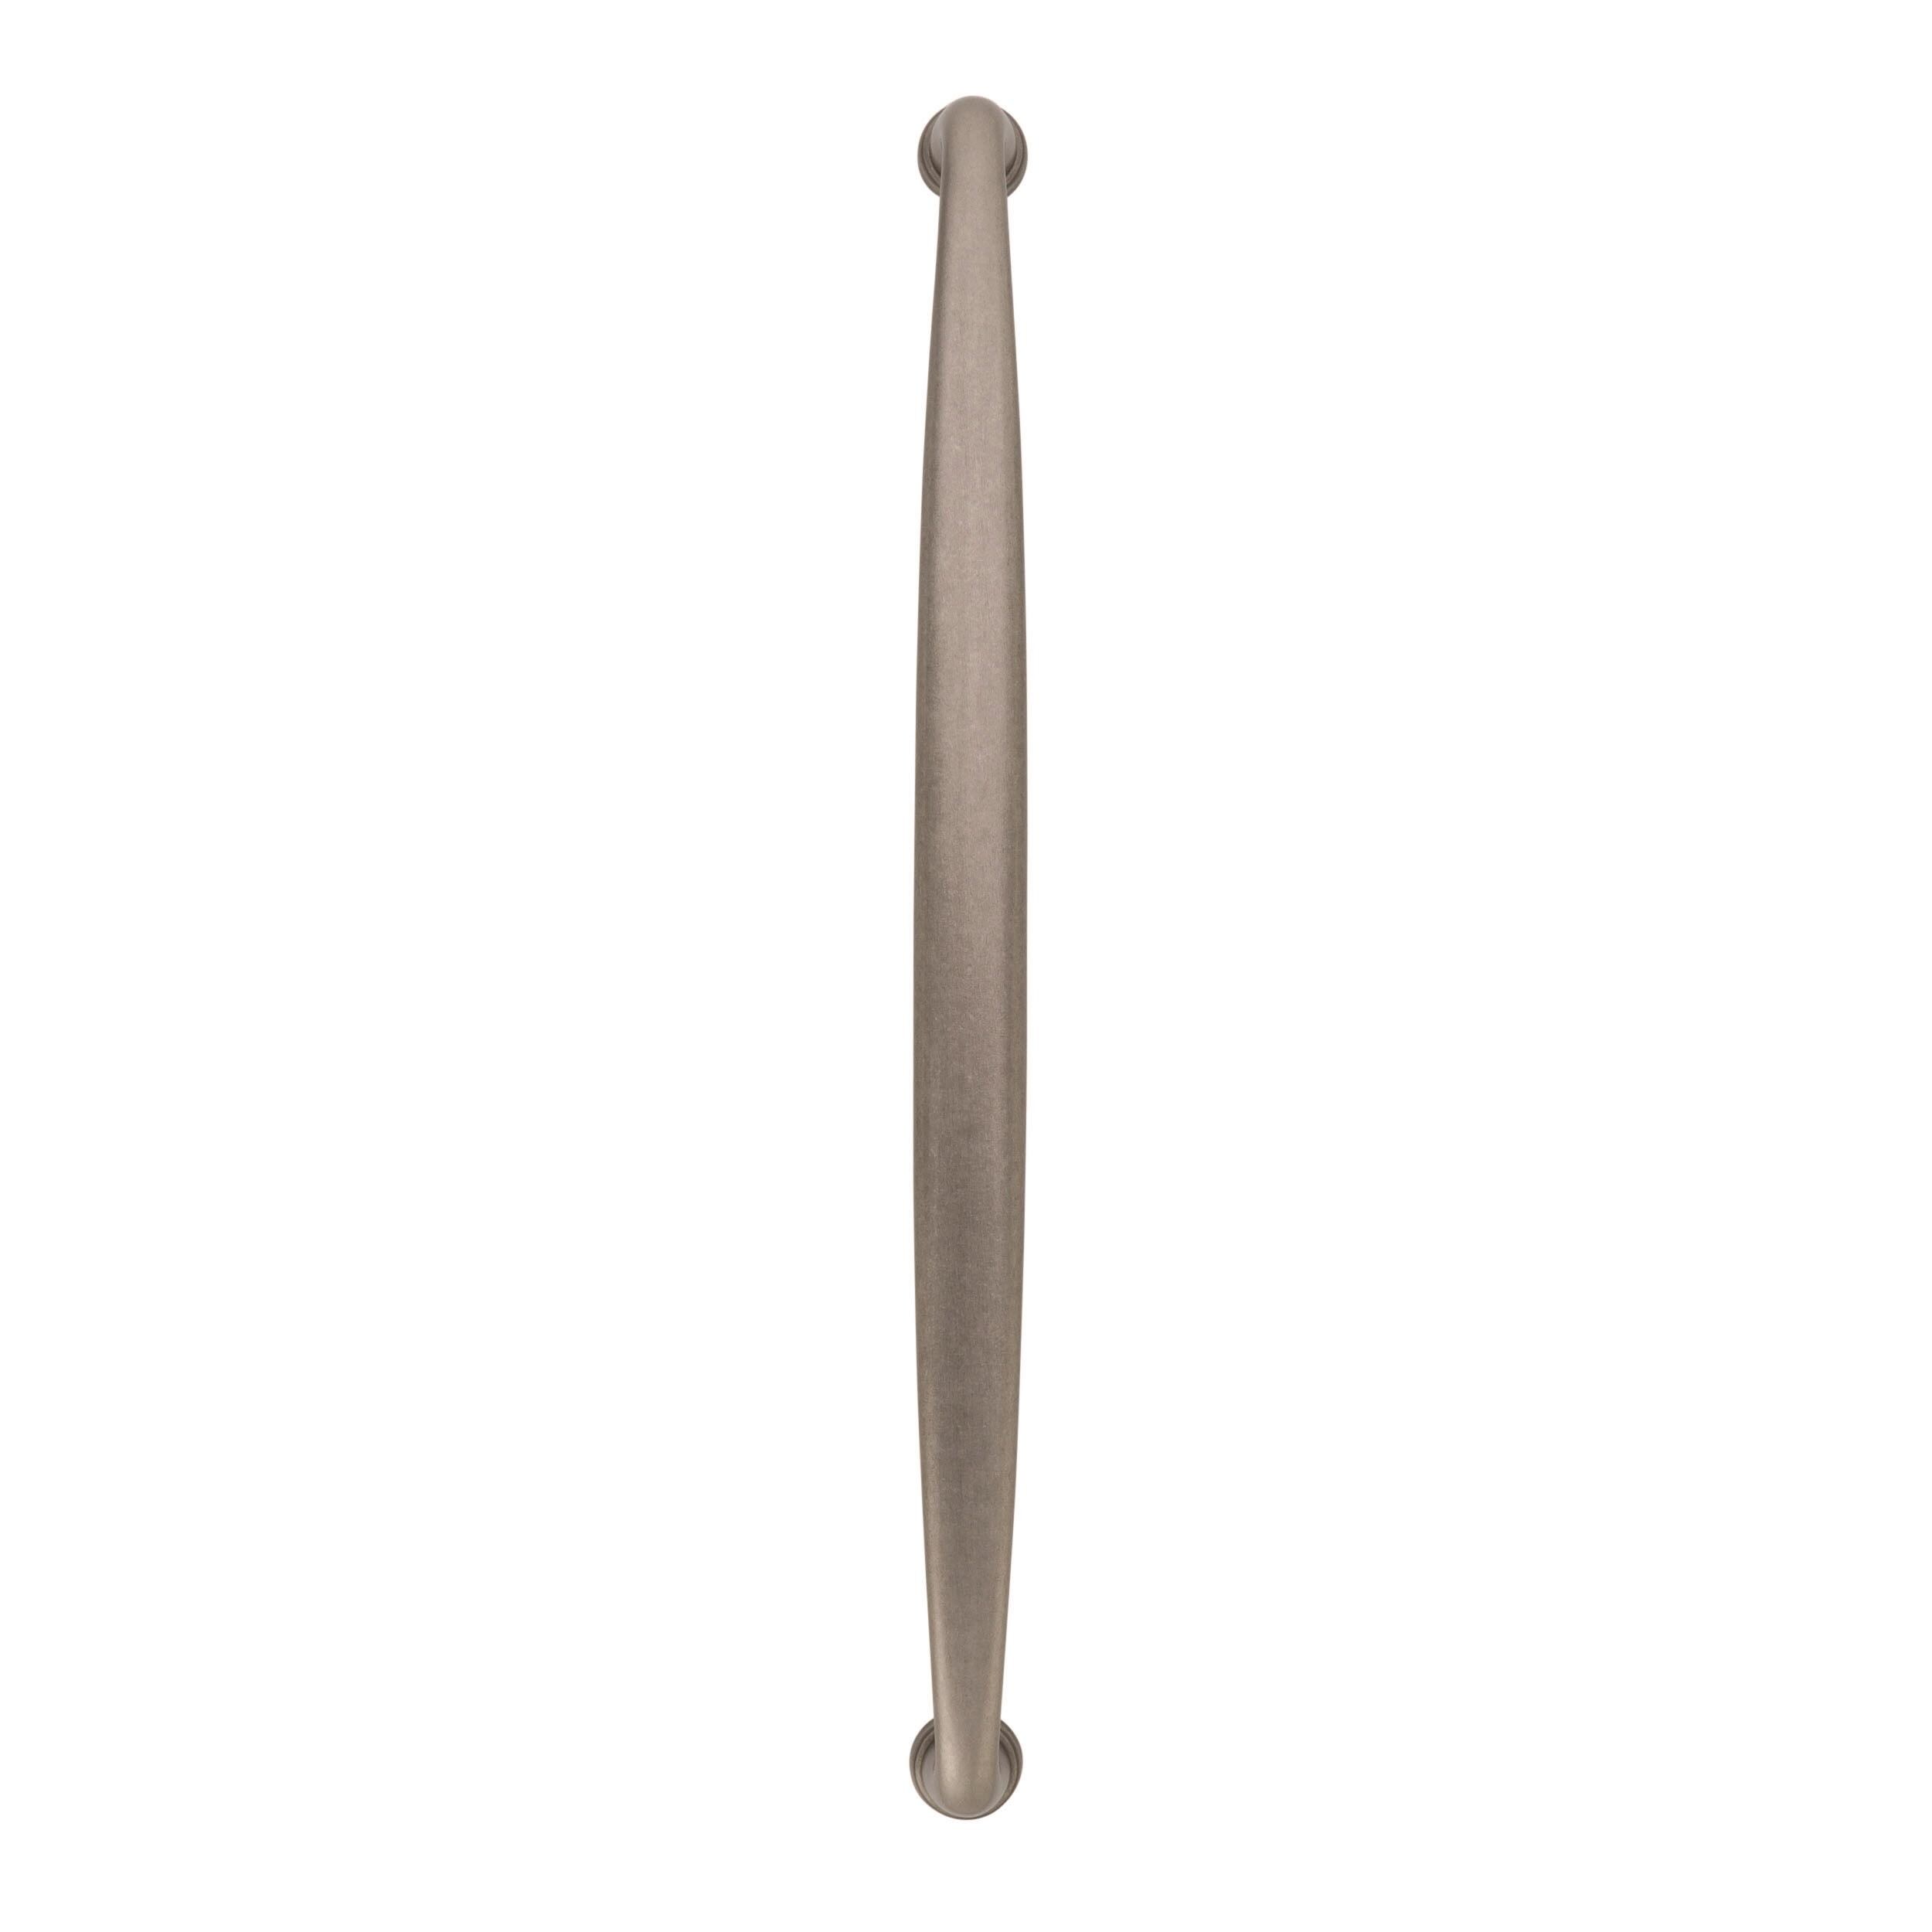 Amerock Kane 18-in Center to Center Weathered Nickel Arch Appliance For Use on Appliances Drawer Pulls